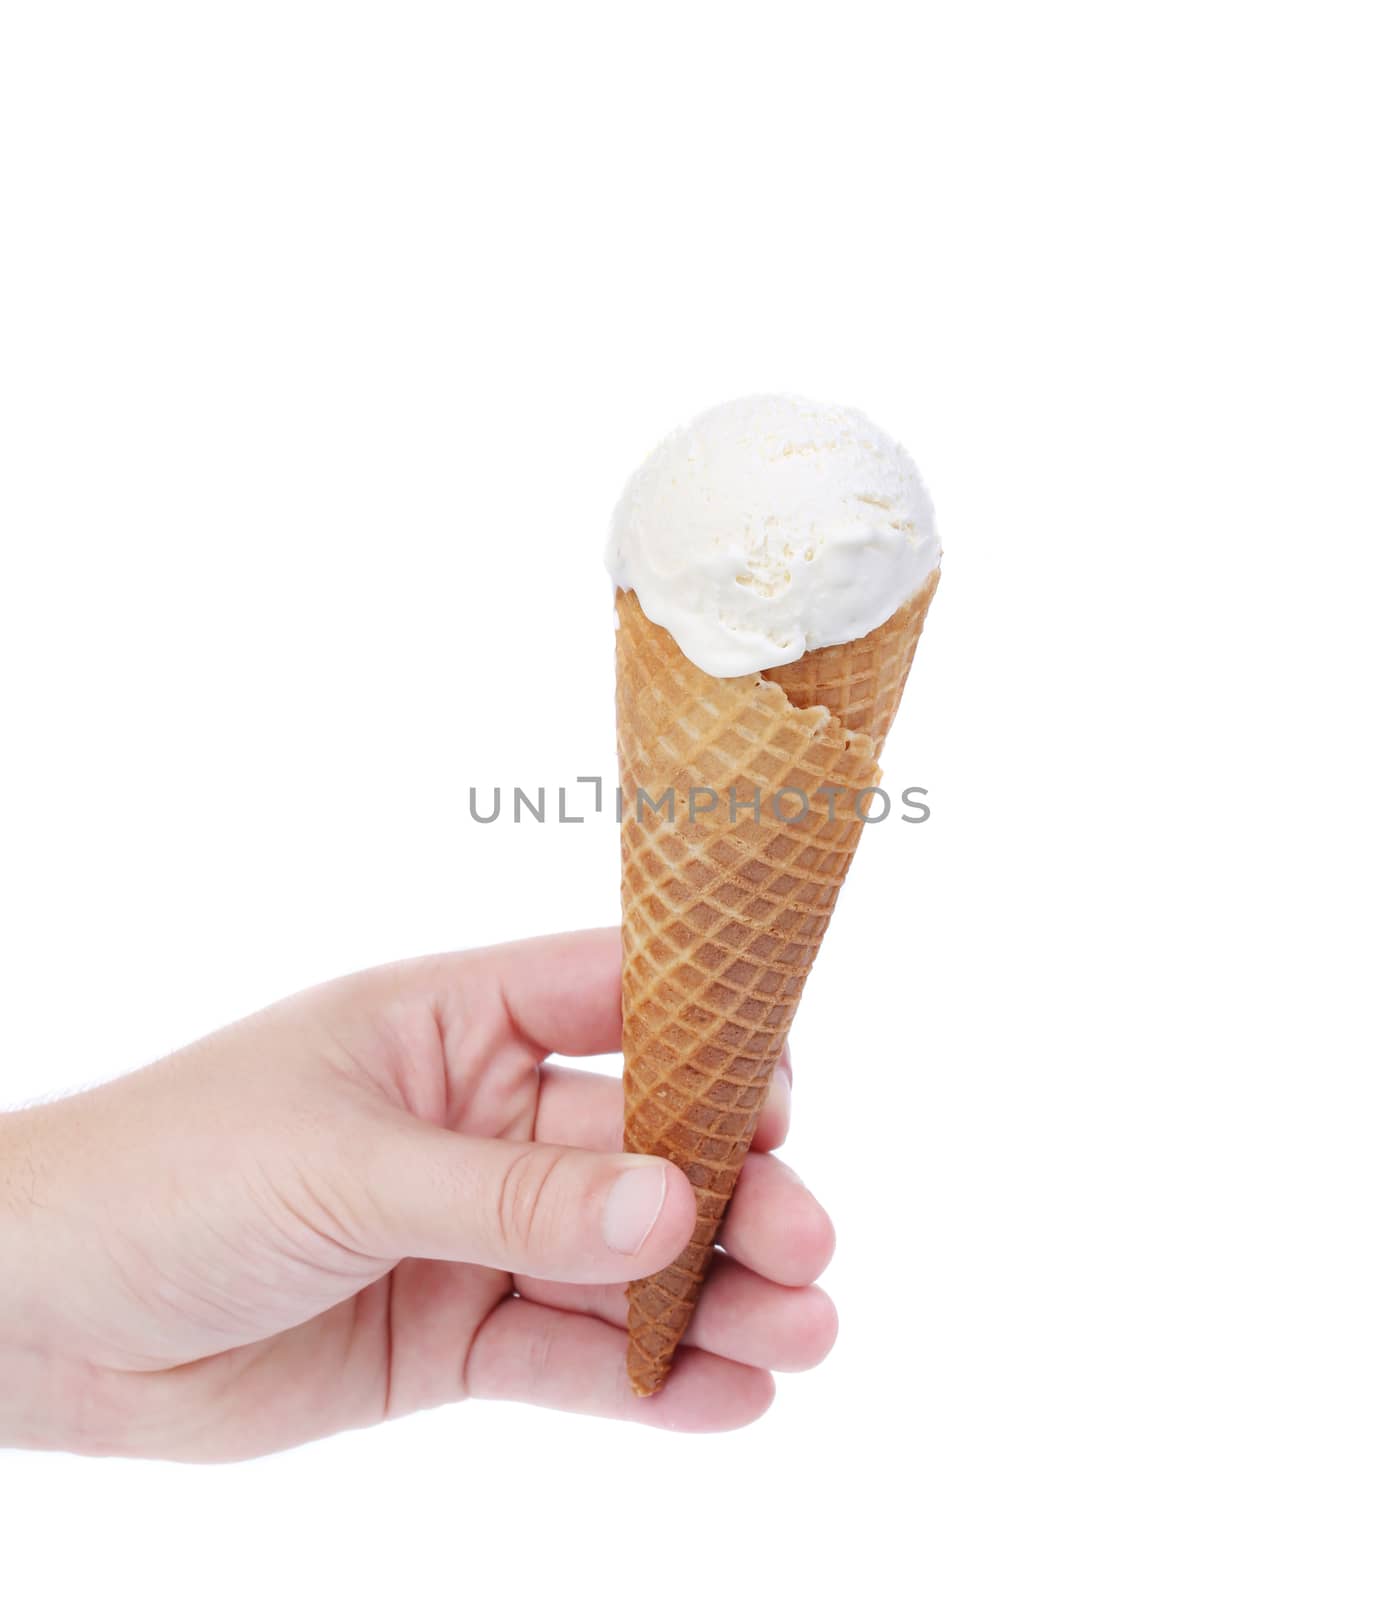 Hand holds cone vanille ice cream. Isolated on a white background.